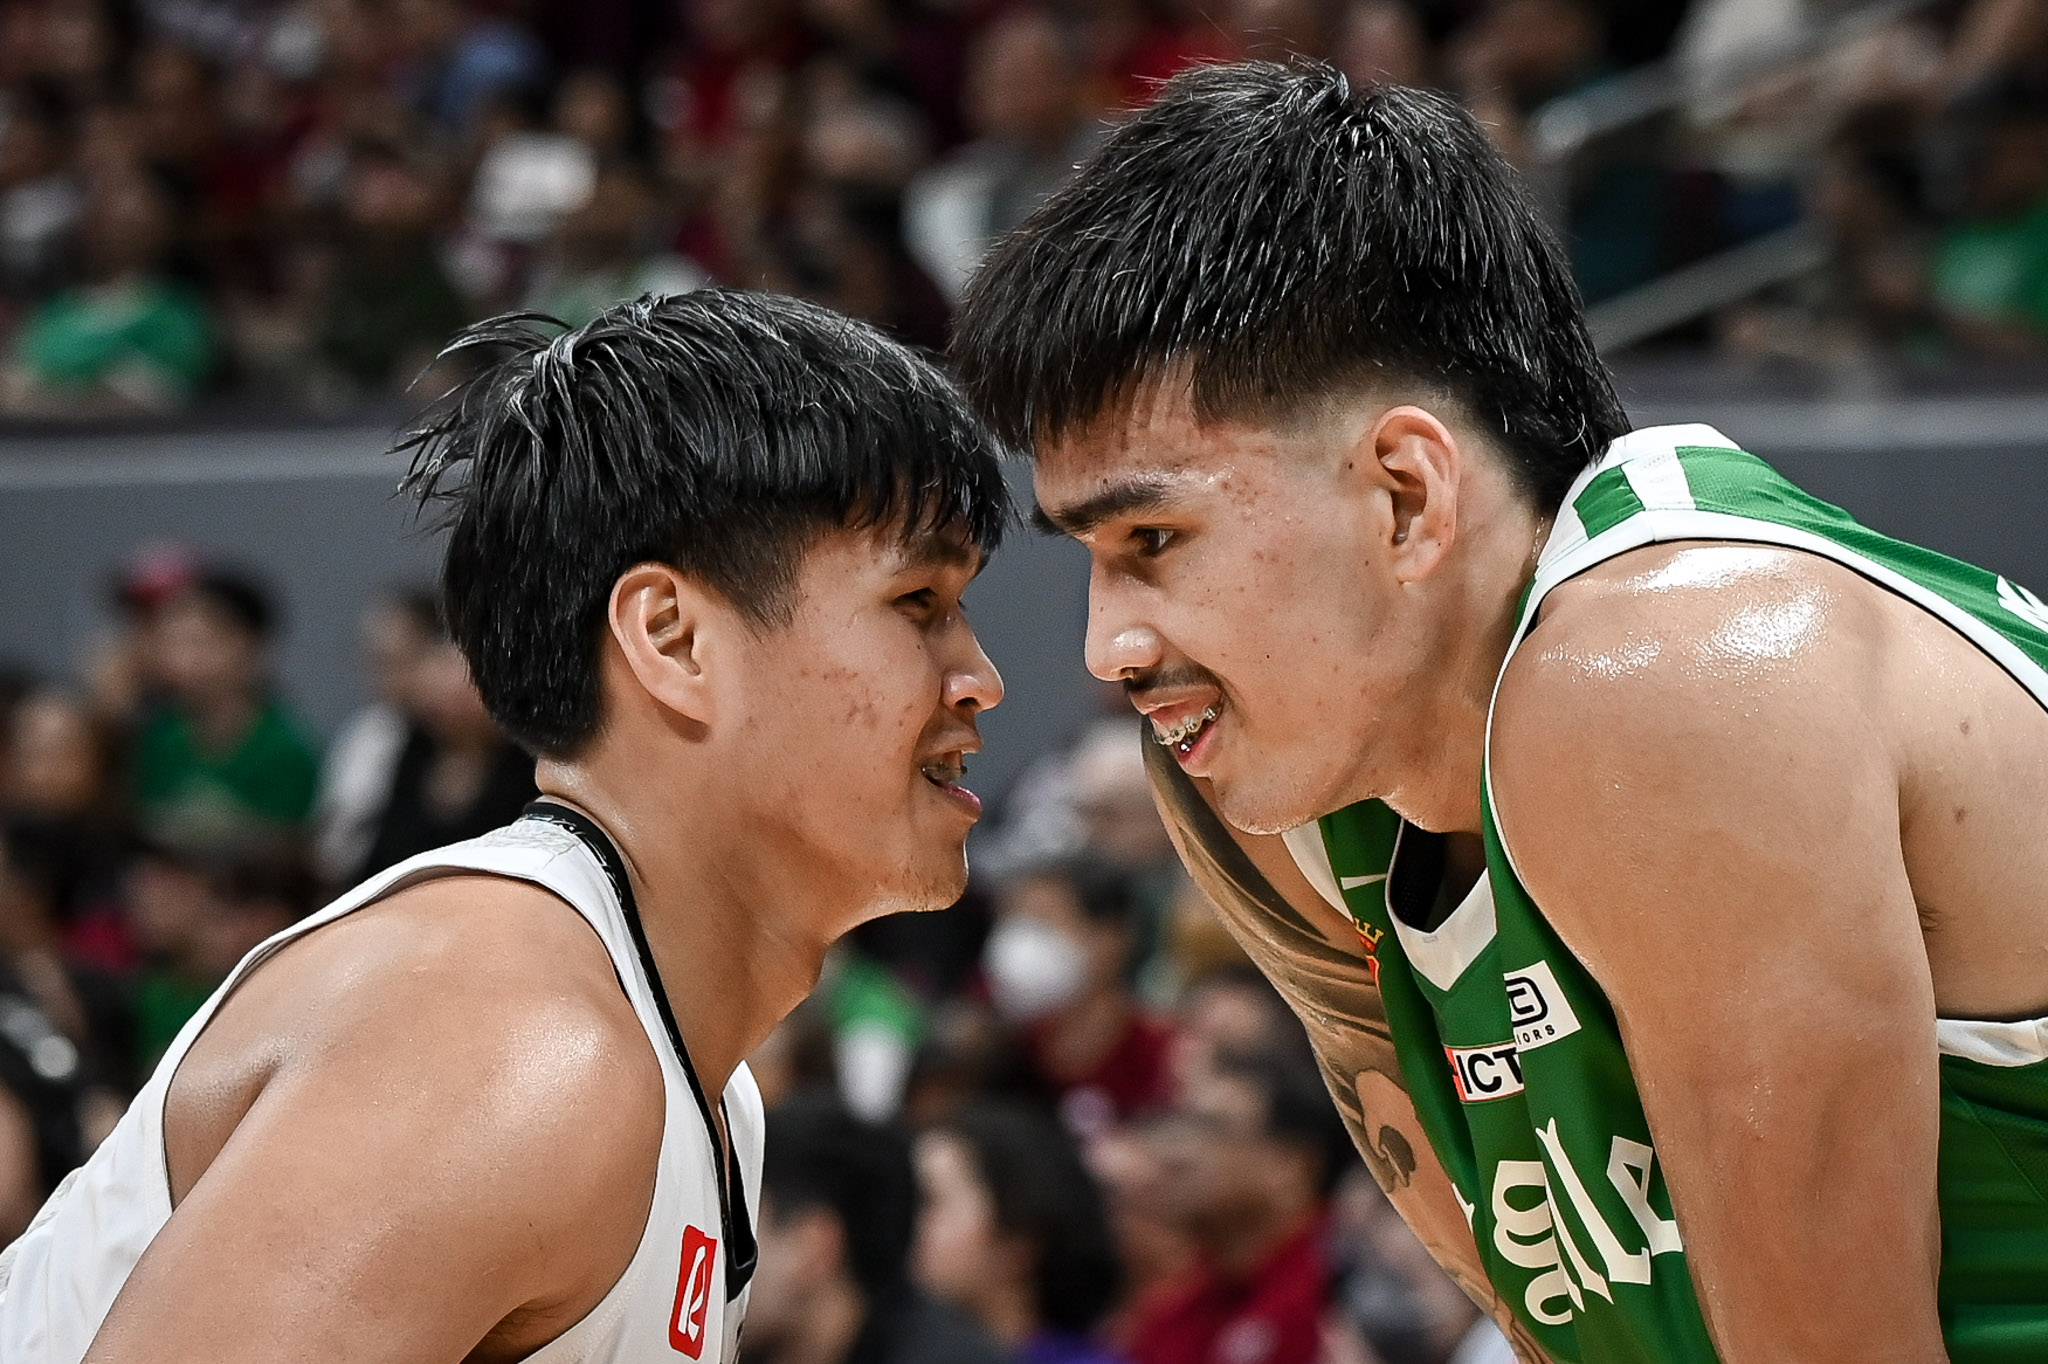 UAAP86-MBB-UP-vs-DLSU-REYLAND-TORRES-KEVIN-QUIAMBAO-7244 Goldwin focuses on 'areas for improvement' as UP goes for the kill Basketball News UAAP UP  - philippine sports news